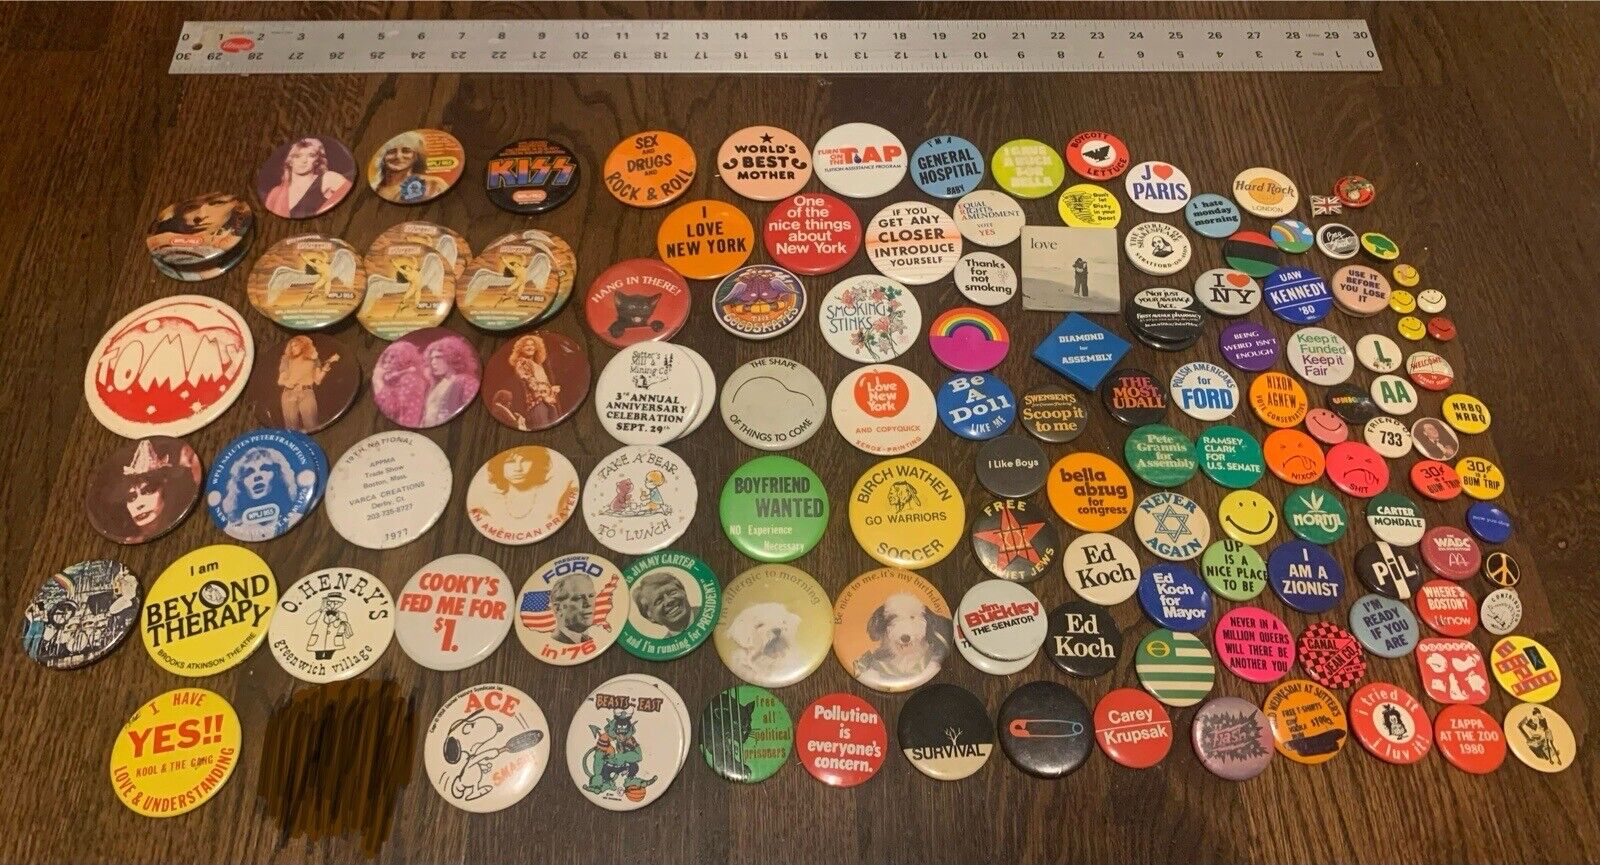 Huge Vintage Pin Collection 70s/80s - Led Zep, Kiss, Bowie, NYC Pinbacks